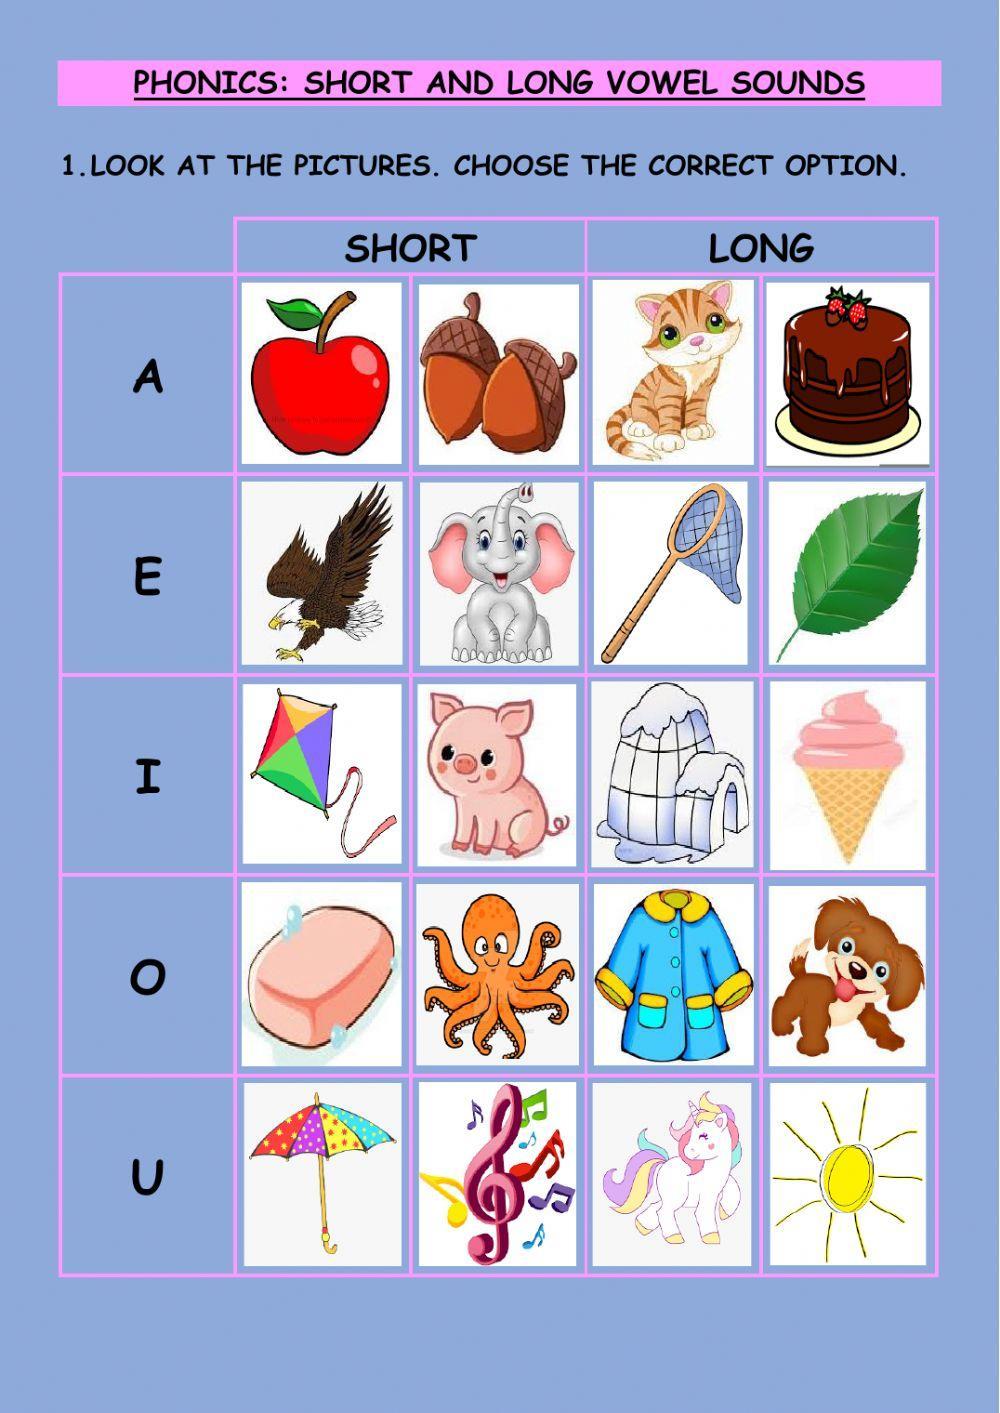 Phonics: Short and Long Vowel Sound